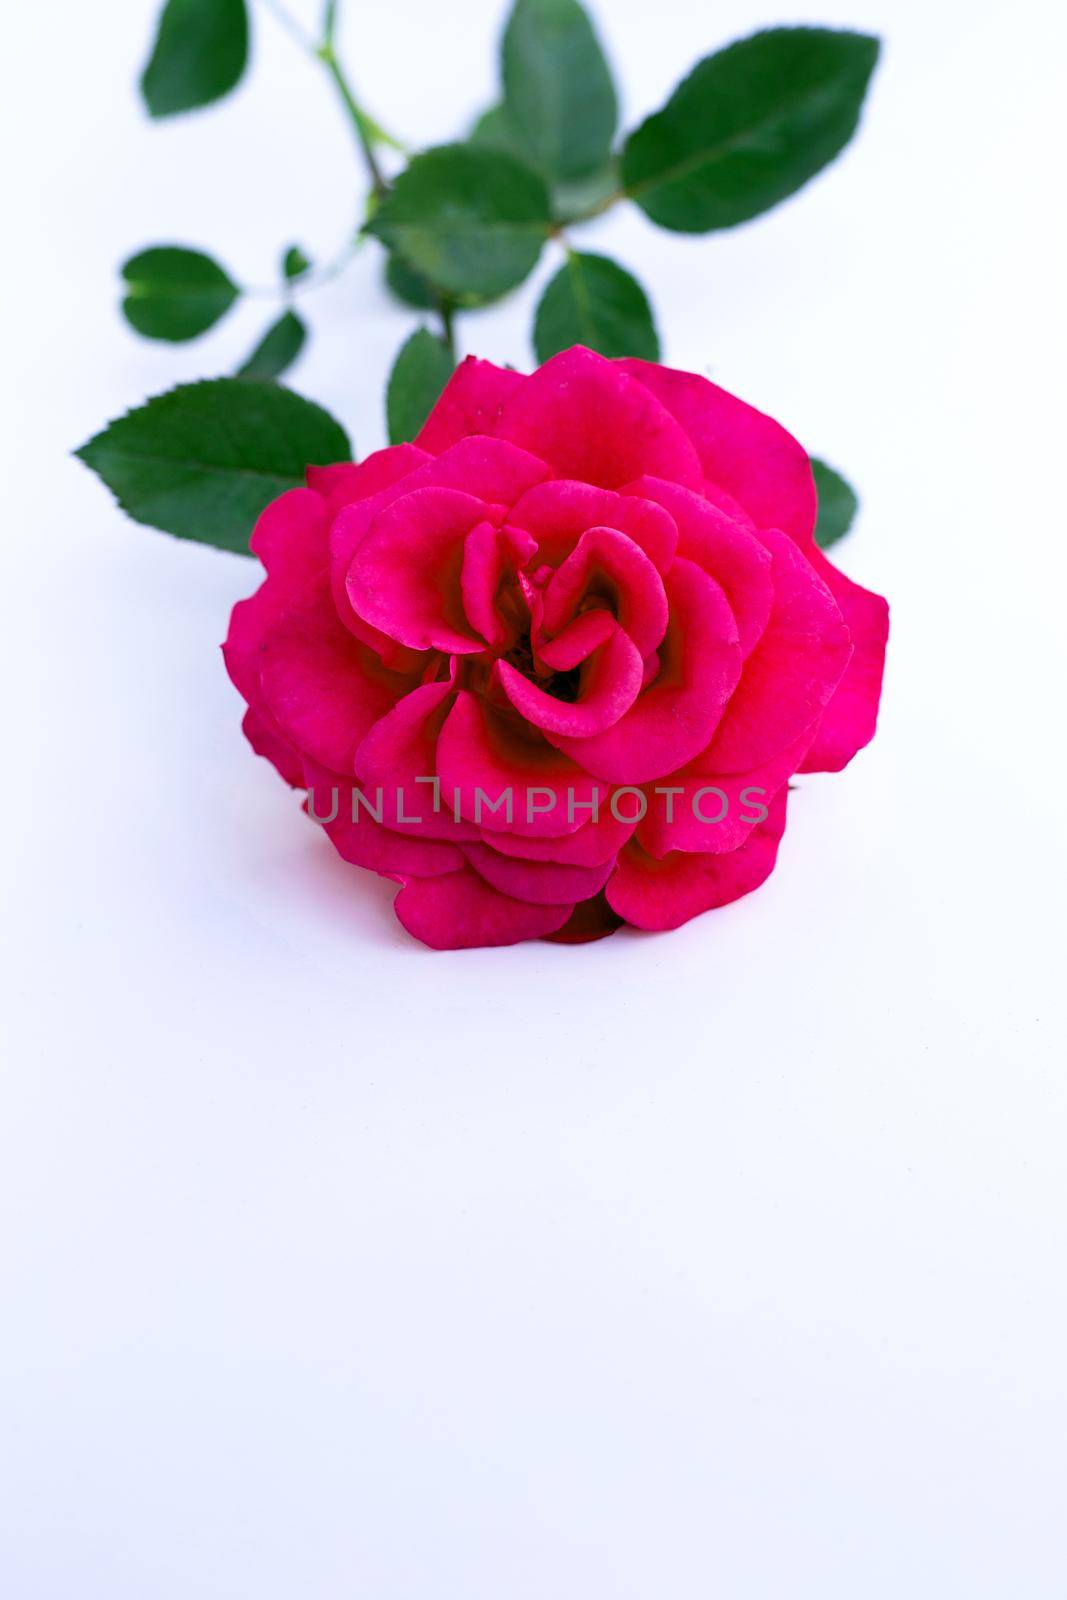 Red rose isolated on white background. by Bowonpat